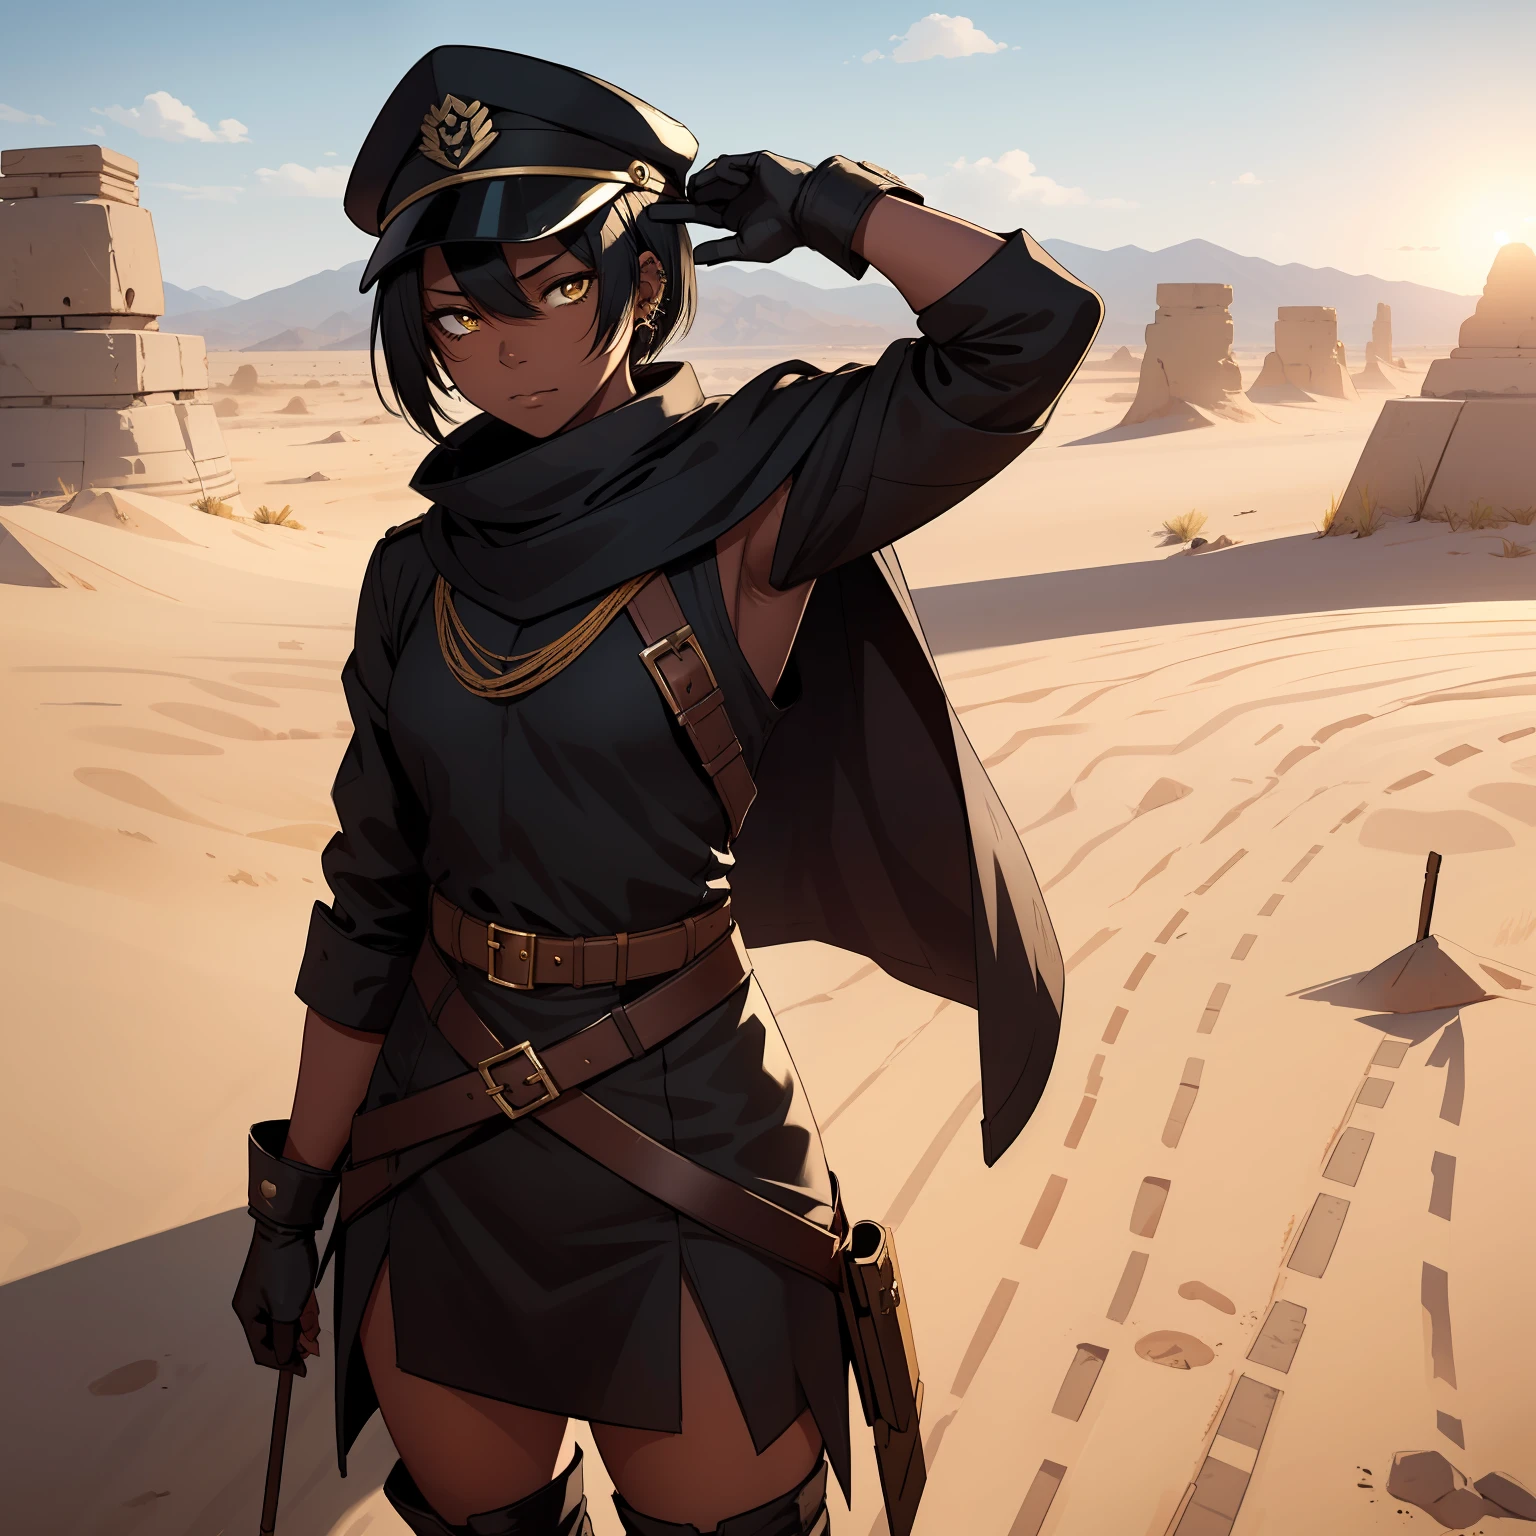 a 1girl, solo, dark-skin, Beautiful yellow eyes, Short Hair Hair, long bangs, Black hair, Tired Desert Gaze, hot weather, The sun is at its zenith, Without clouds, body piercings, bandana on the face, military cap on his head, gloves, soldier's cloak, High boots, The Perfect Picture.